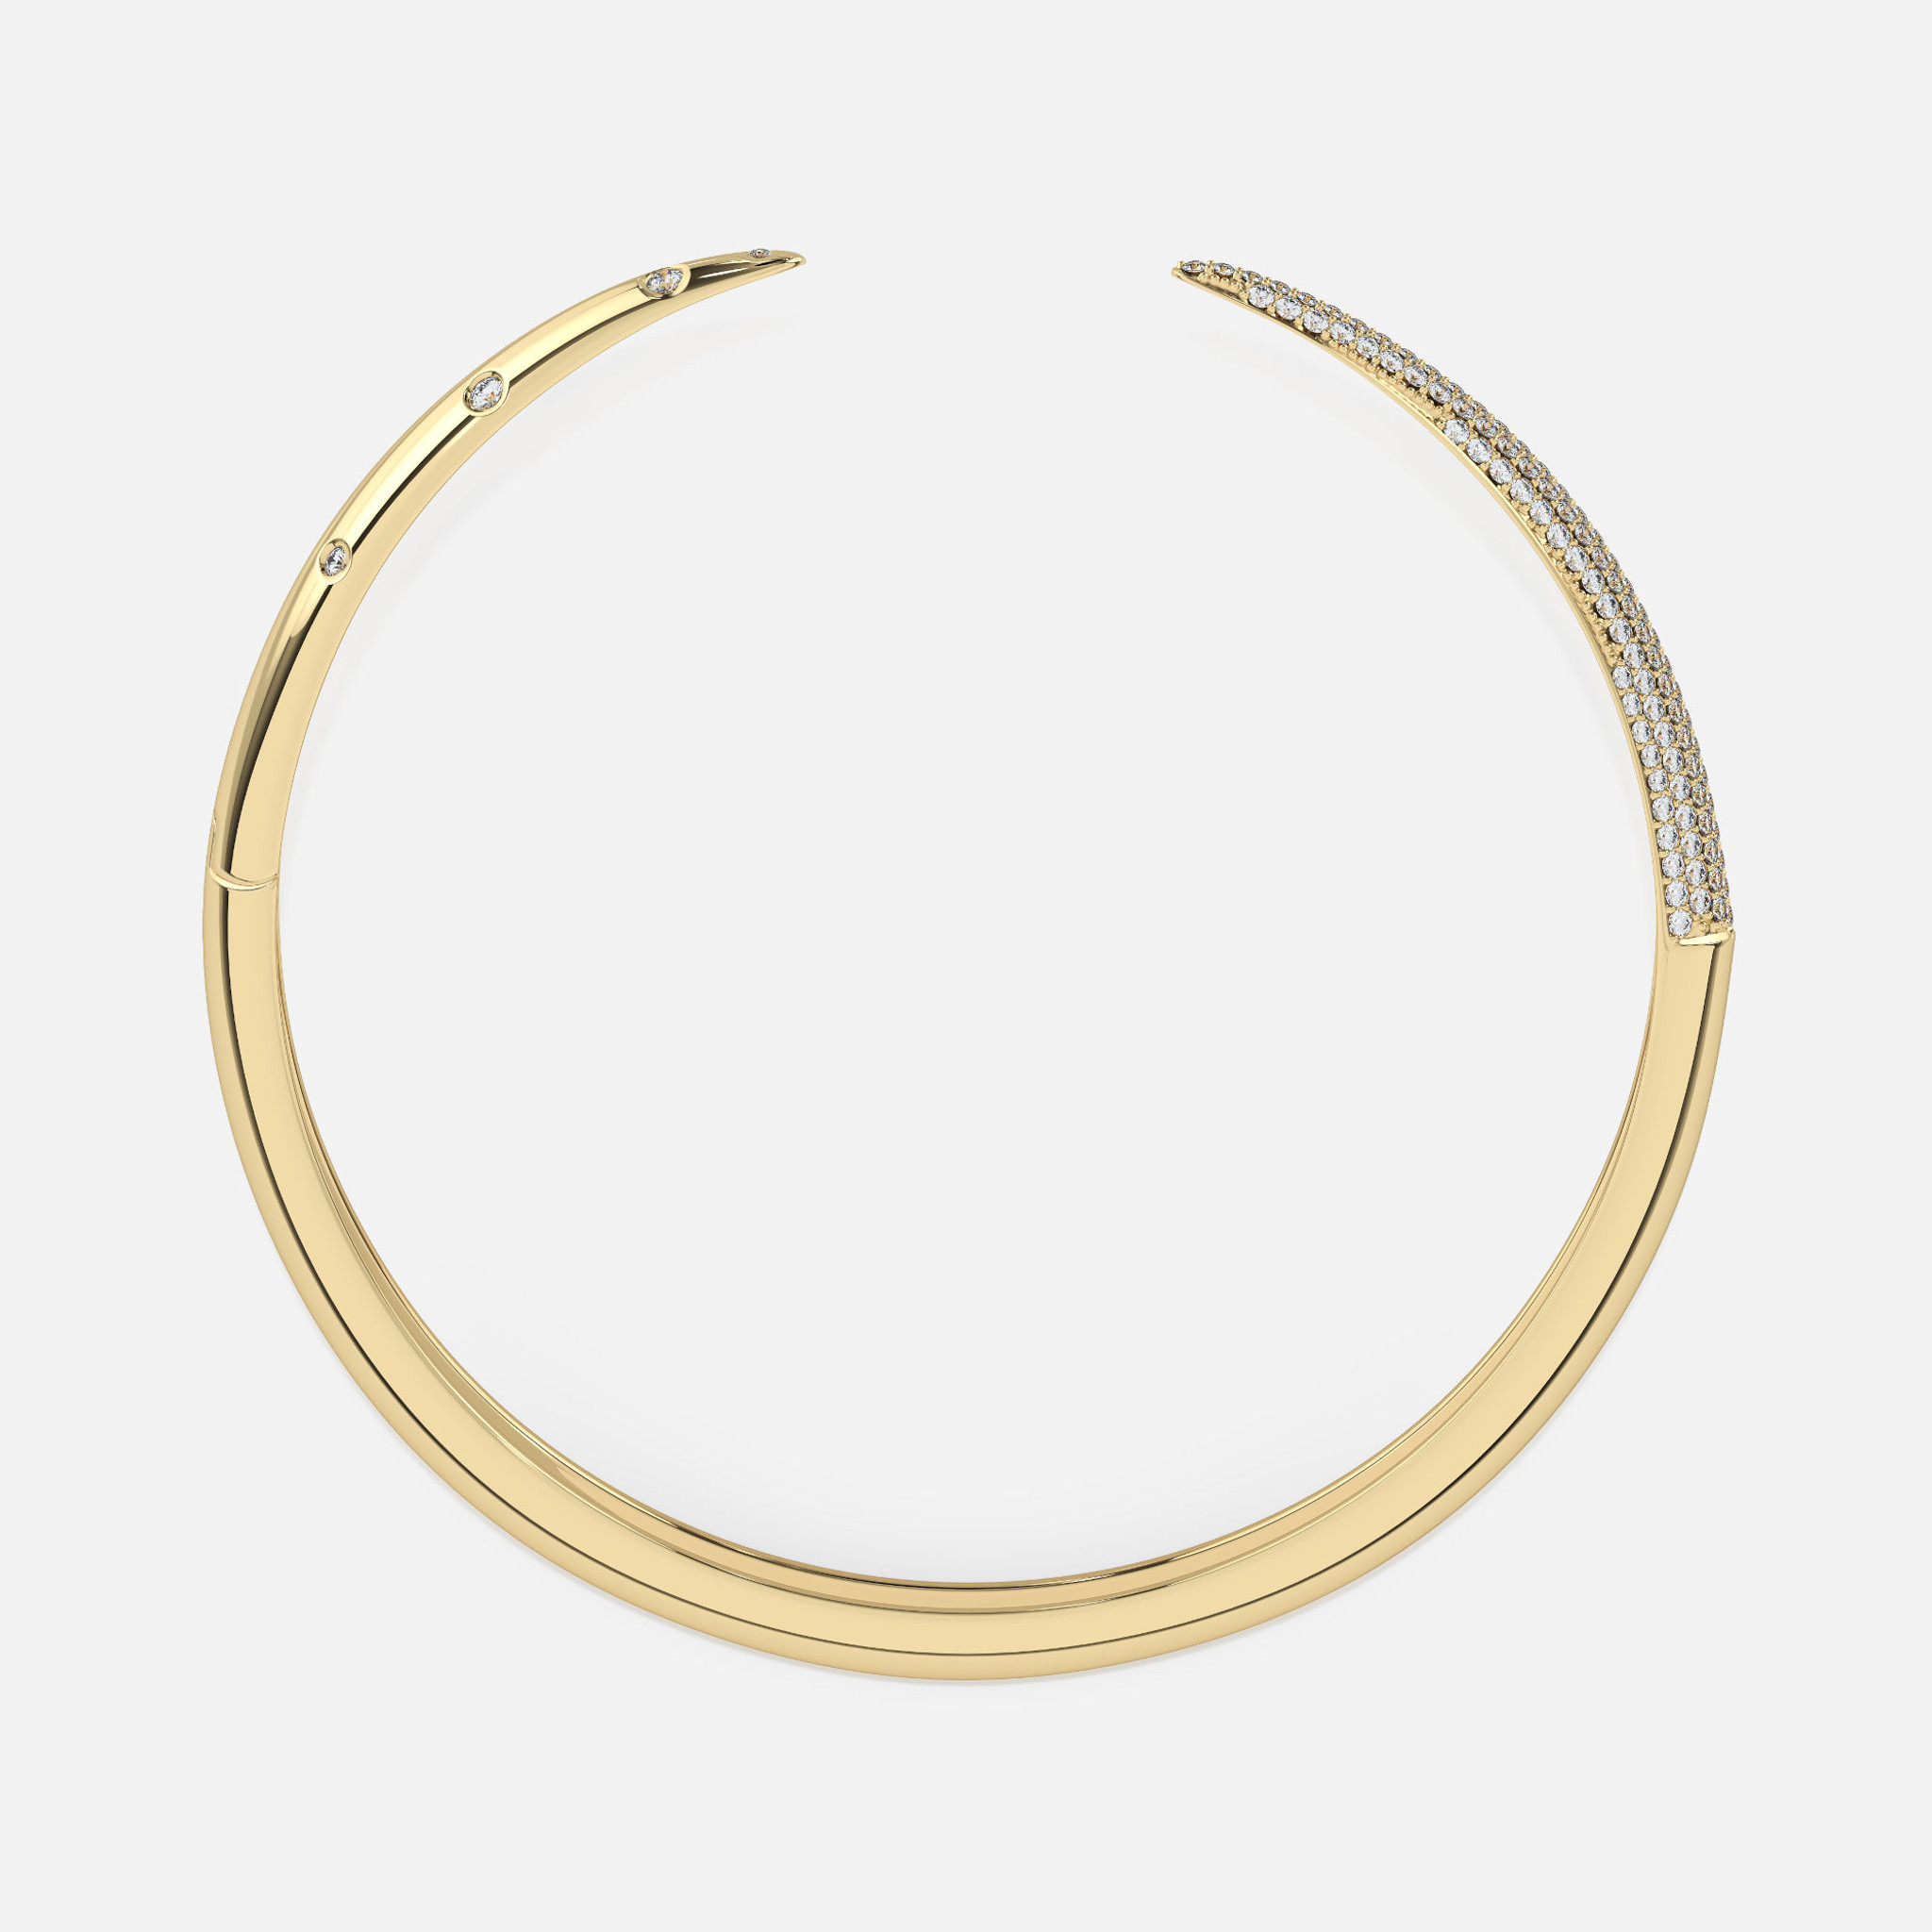 Elevate your look with this eternally-chic 14k gold cuff bracelet, featuring .49ct of diamonds for a touch of timeless glamour worn alone or stacked.